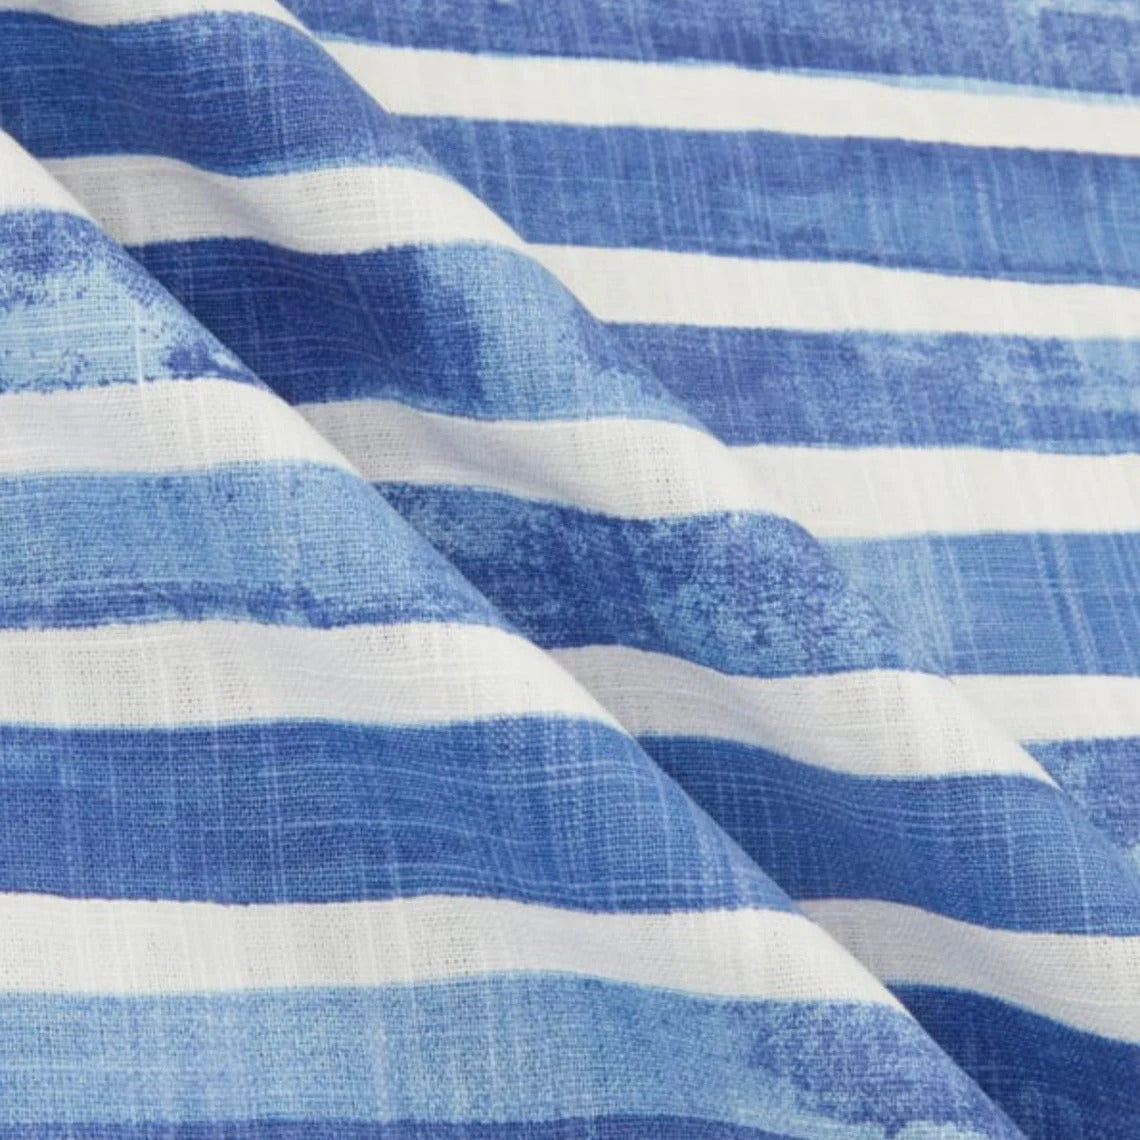 pinch pleated curtains in nelson commodore blue horizontal watercolor stripe